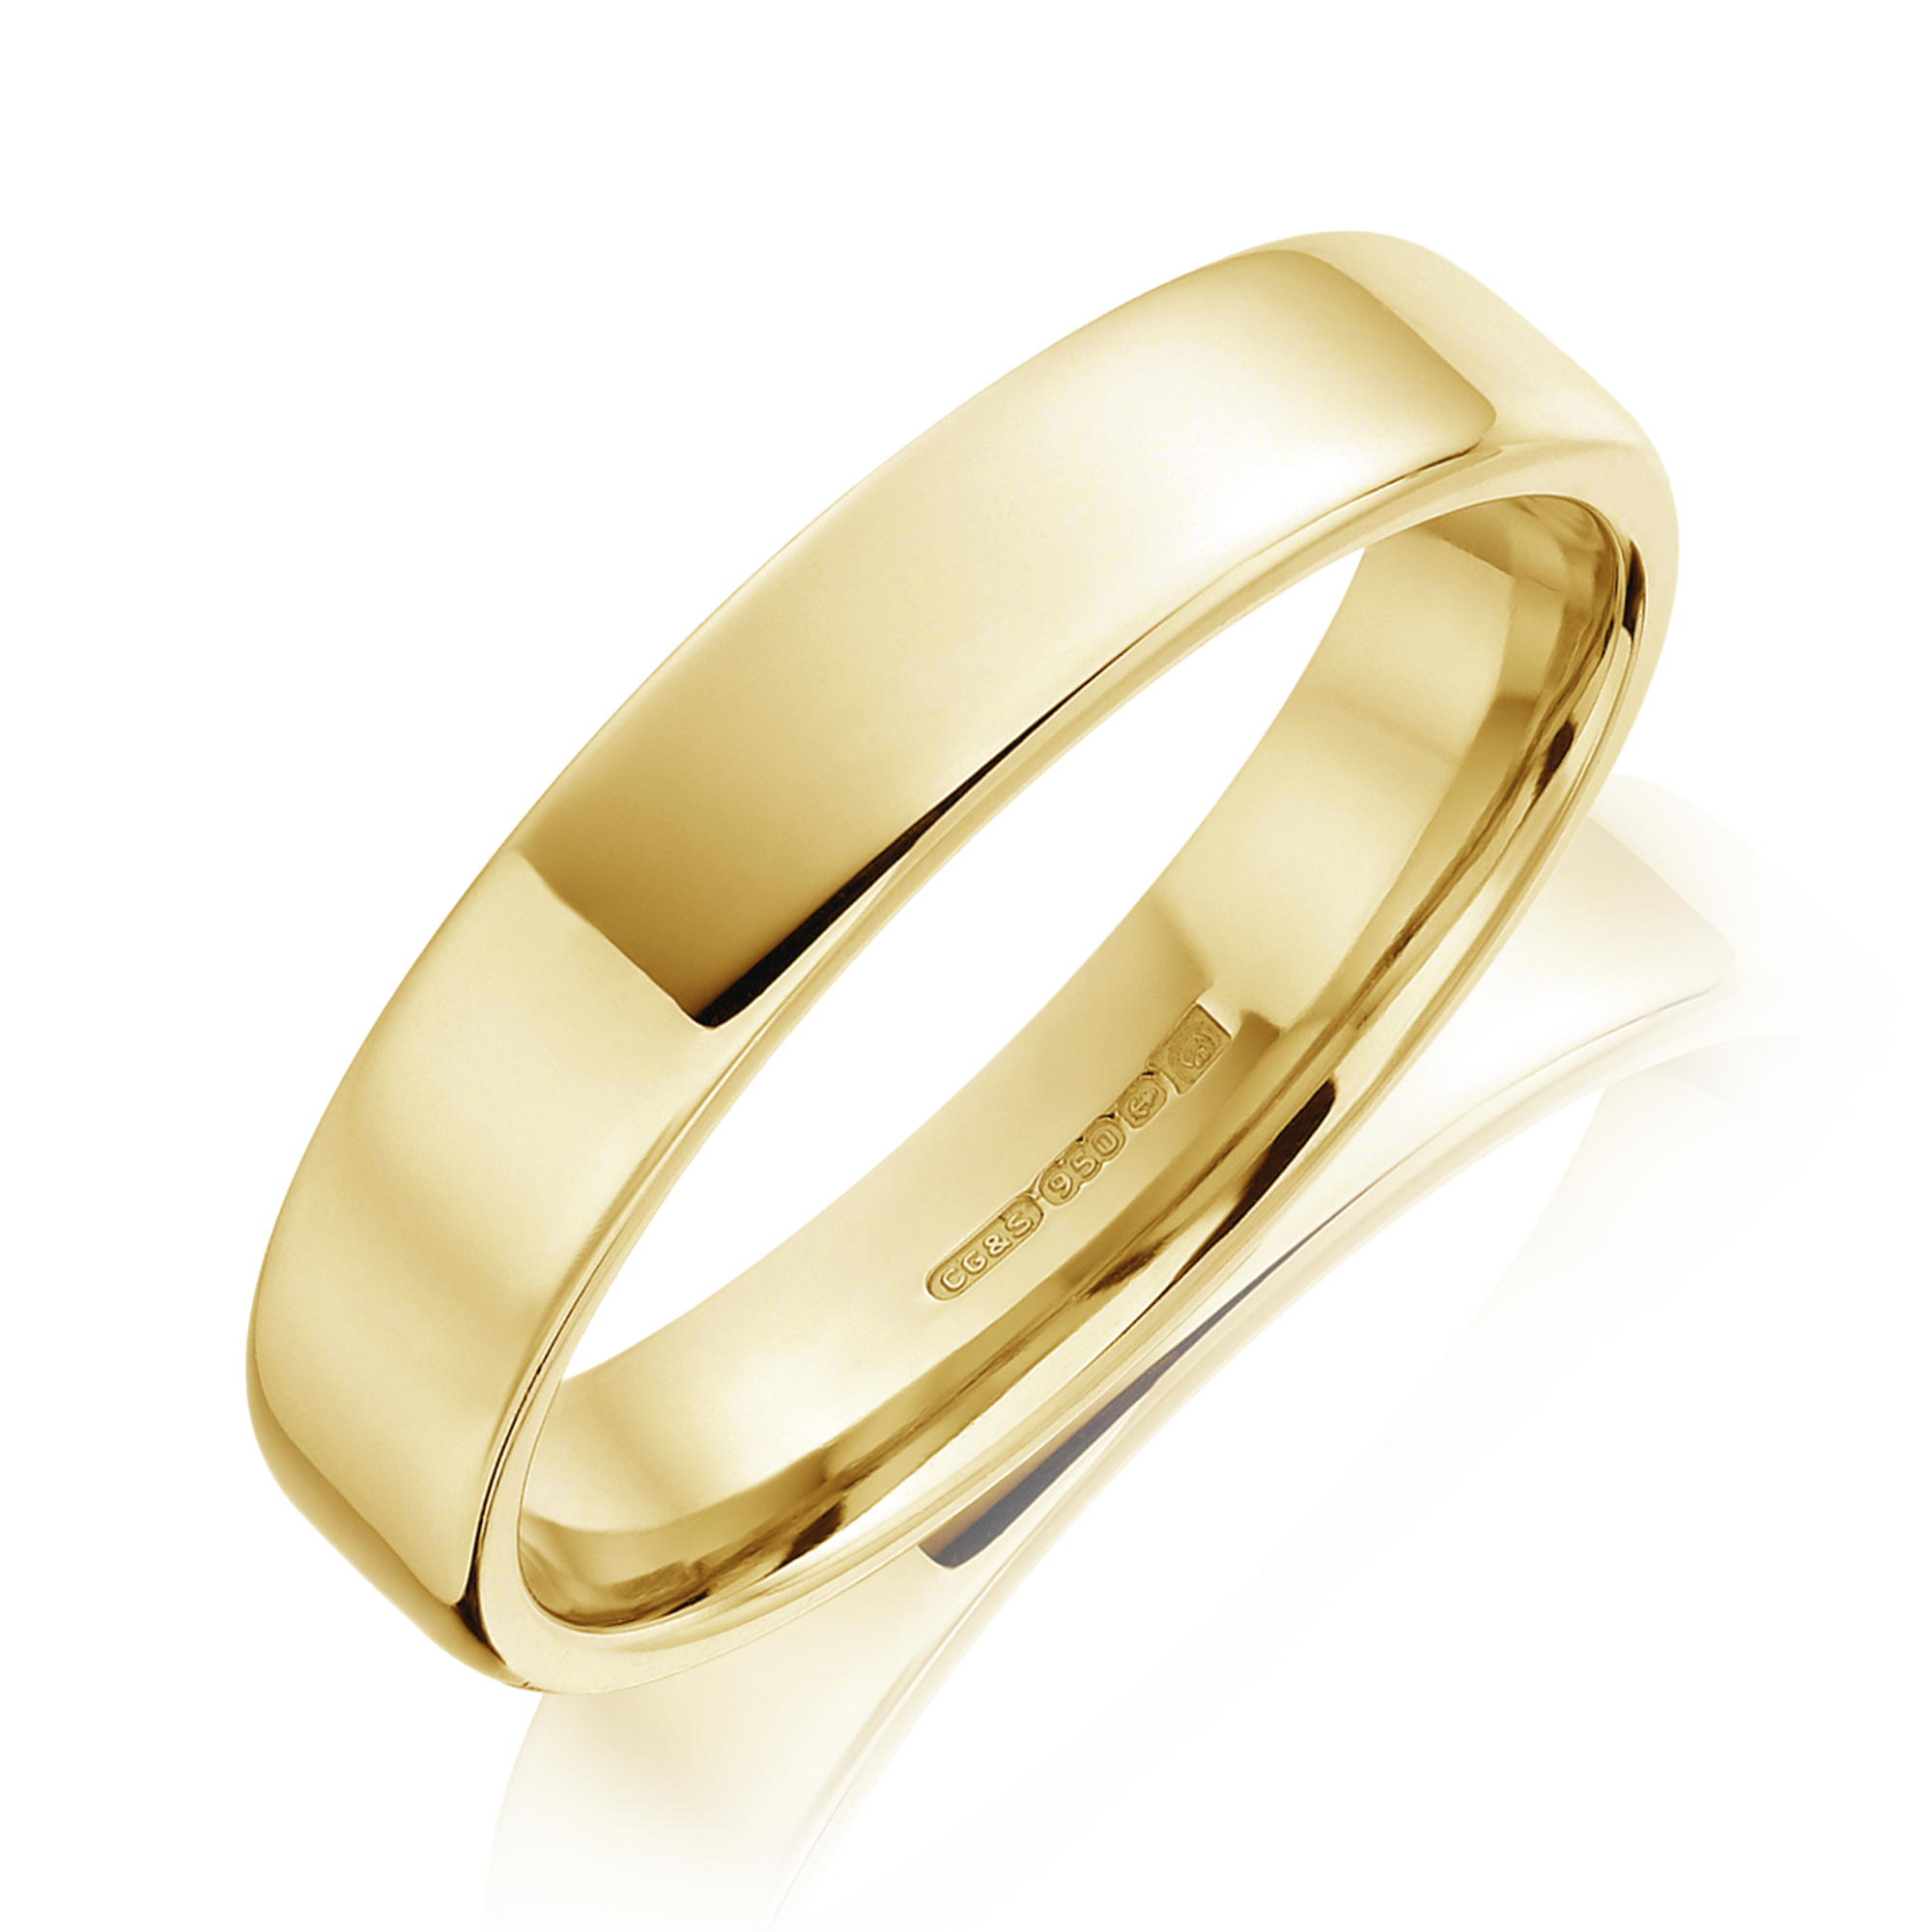 Buy Men's 5mm Yellow Gold Wedding Ring Band, Flat Men's Wedding Band,  Simple Wedding Band for Him, Modern Plain Band in 10K 14K 18K Solid Gold  Online in India - Etsy